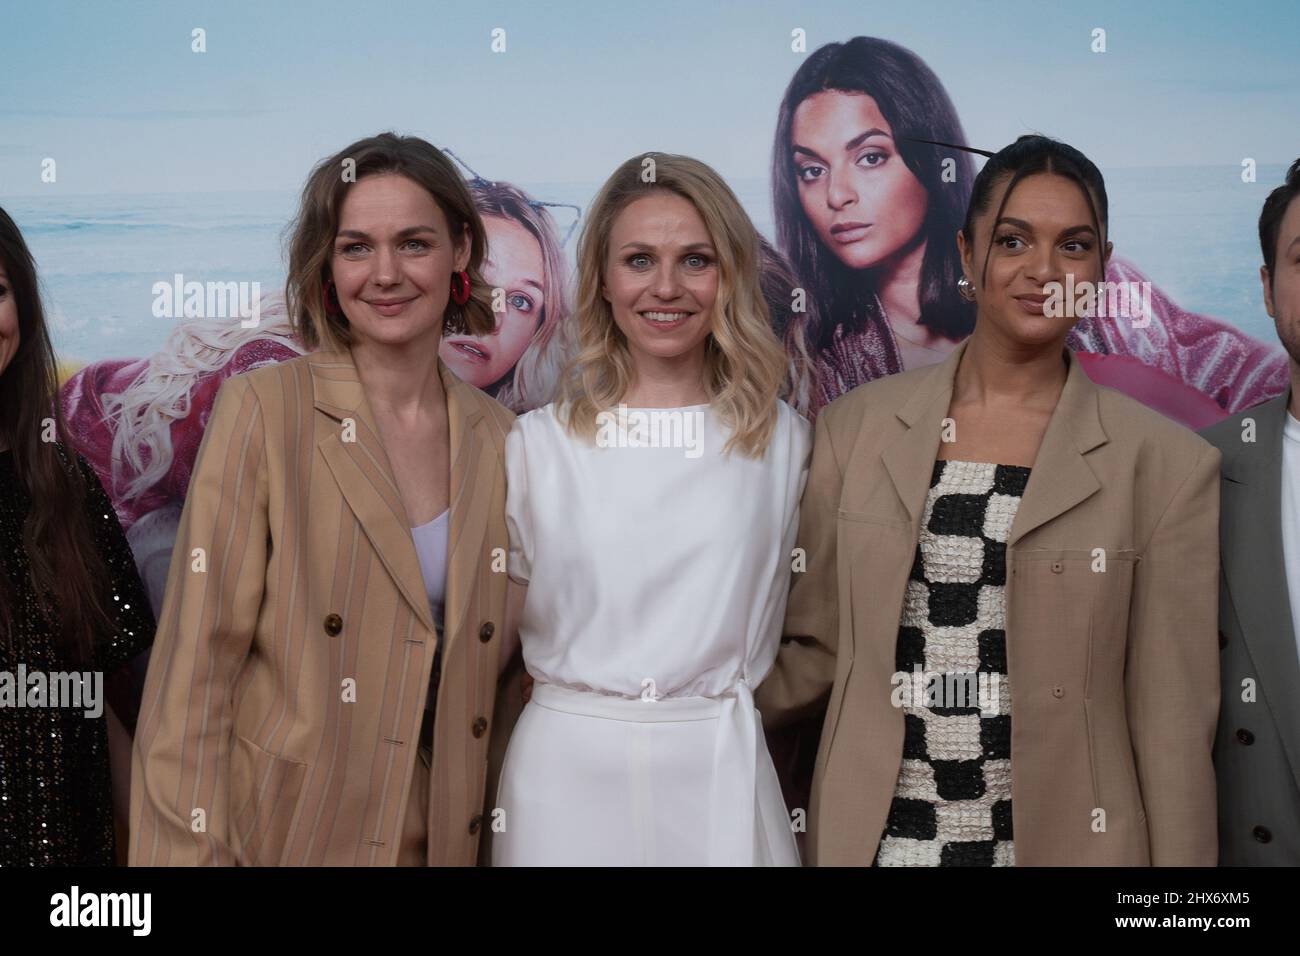 The three main actress Luise Heyer, Teresa Rizos and Taneshia Abt on the Red Carpet. On March 9, 2022, the premiere of the film 'JGA Jasmin Gina Anna' took place at the Mathaeser in Munich. The main roles are occupied by Luise Heyer as Jasmin, Taneshia Abt as Gina and Teresa Rizos as Anna. (Photo by Alexander Pohl/Sipa USA) Stock Photo